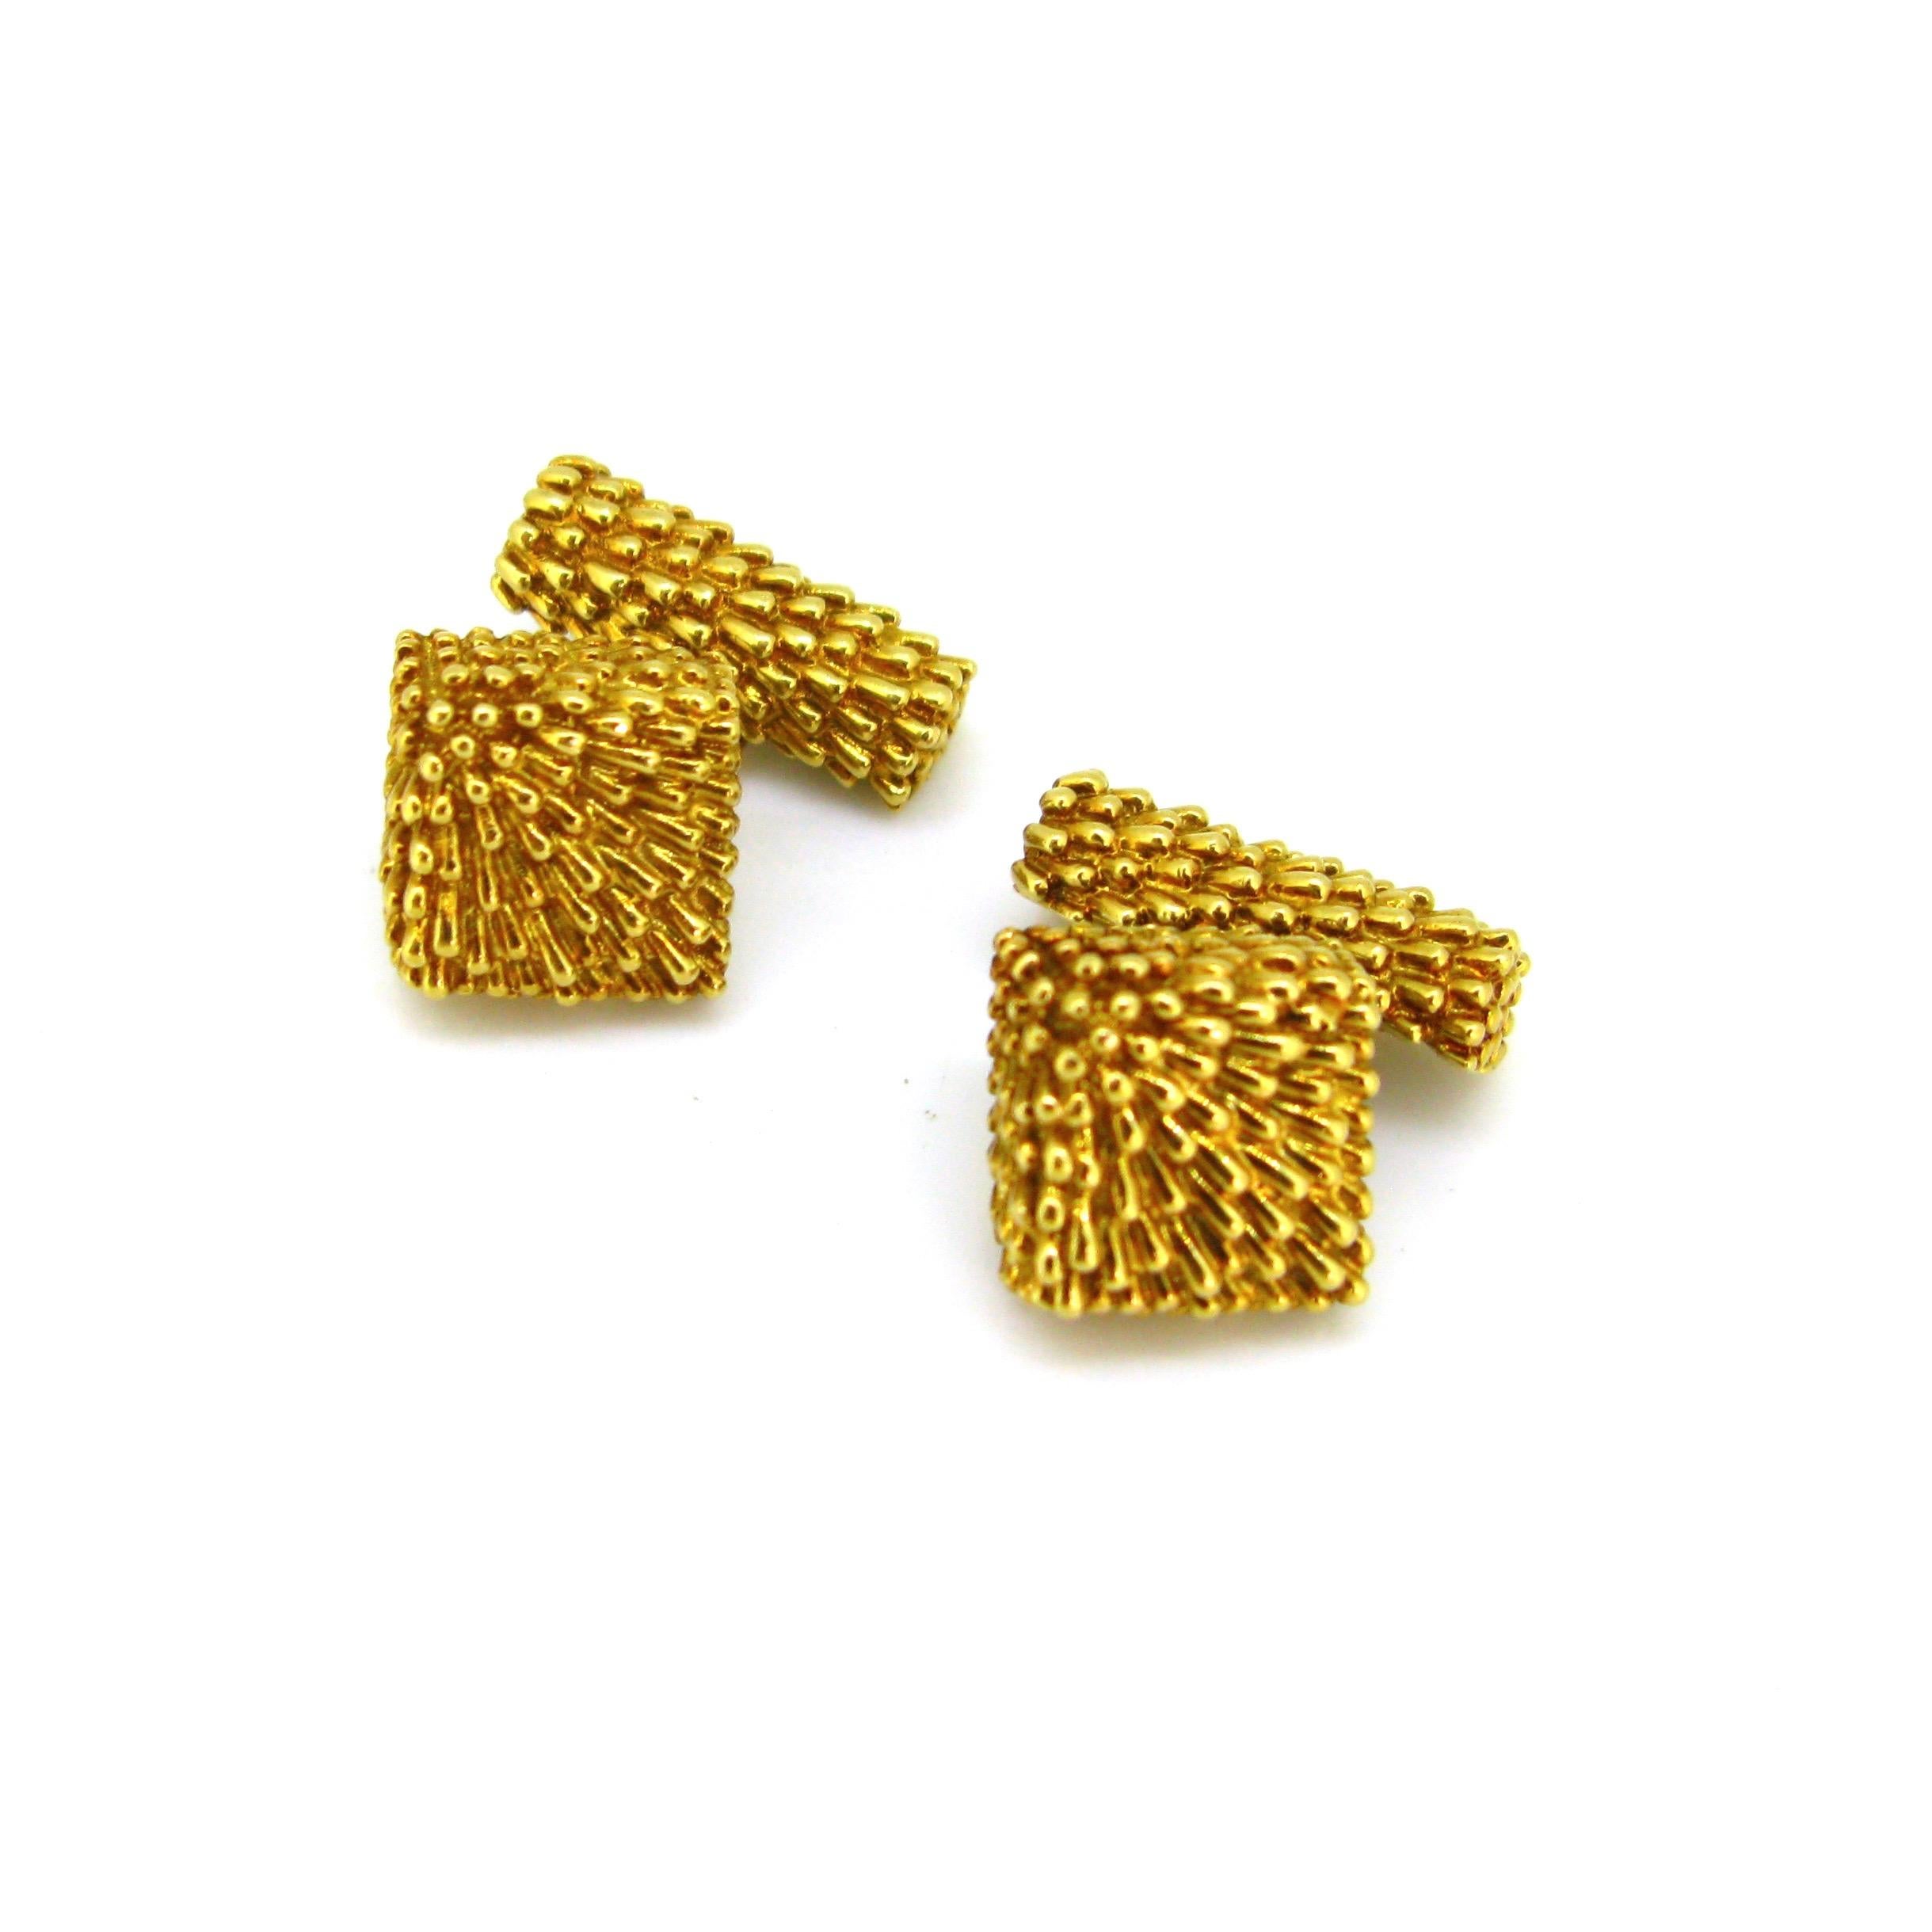 This beautiful pair of gold textured cufflinks is made in 18 yellow gold. It is signed VCA for Van Cleef & Arpels on the bar with the eagle’s head. We can also see the maker’s mark of the jewellers Georland; their atelier was founded in Paris in